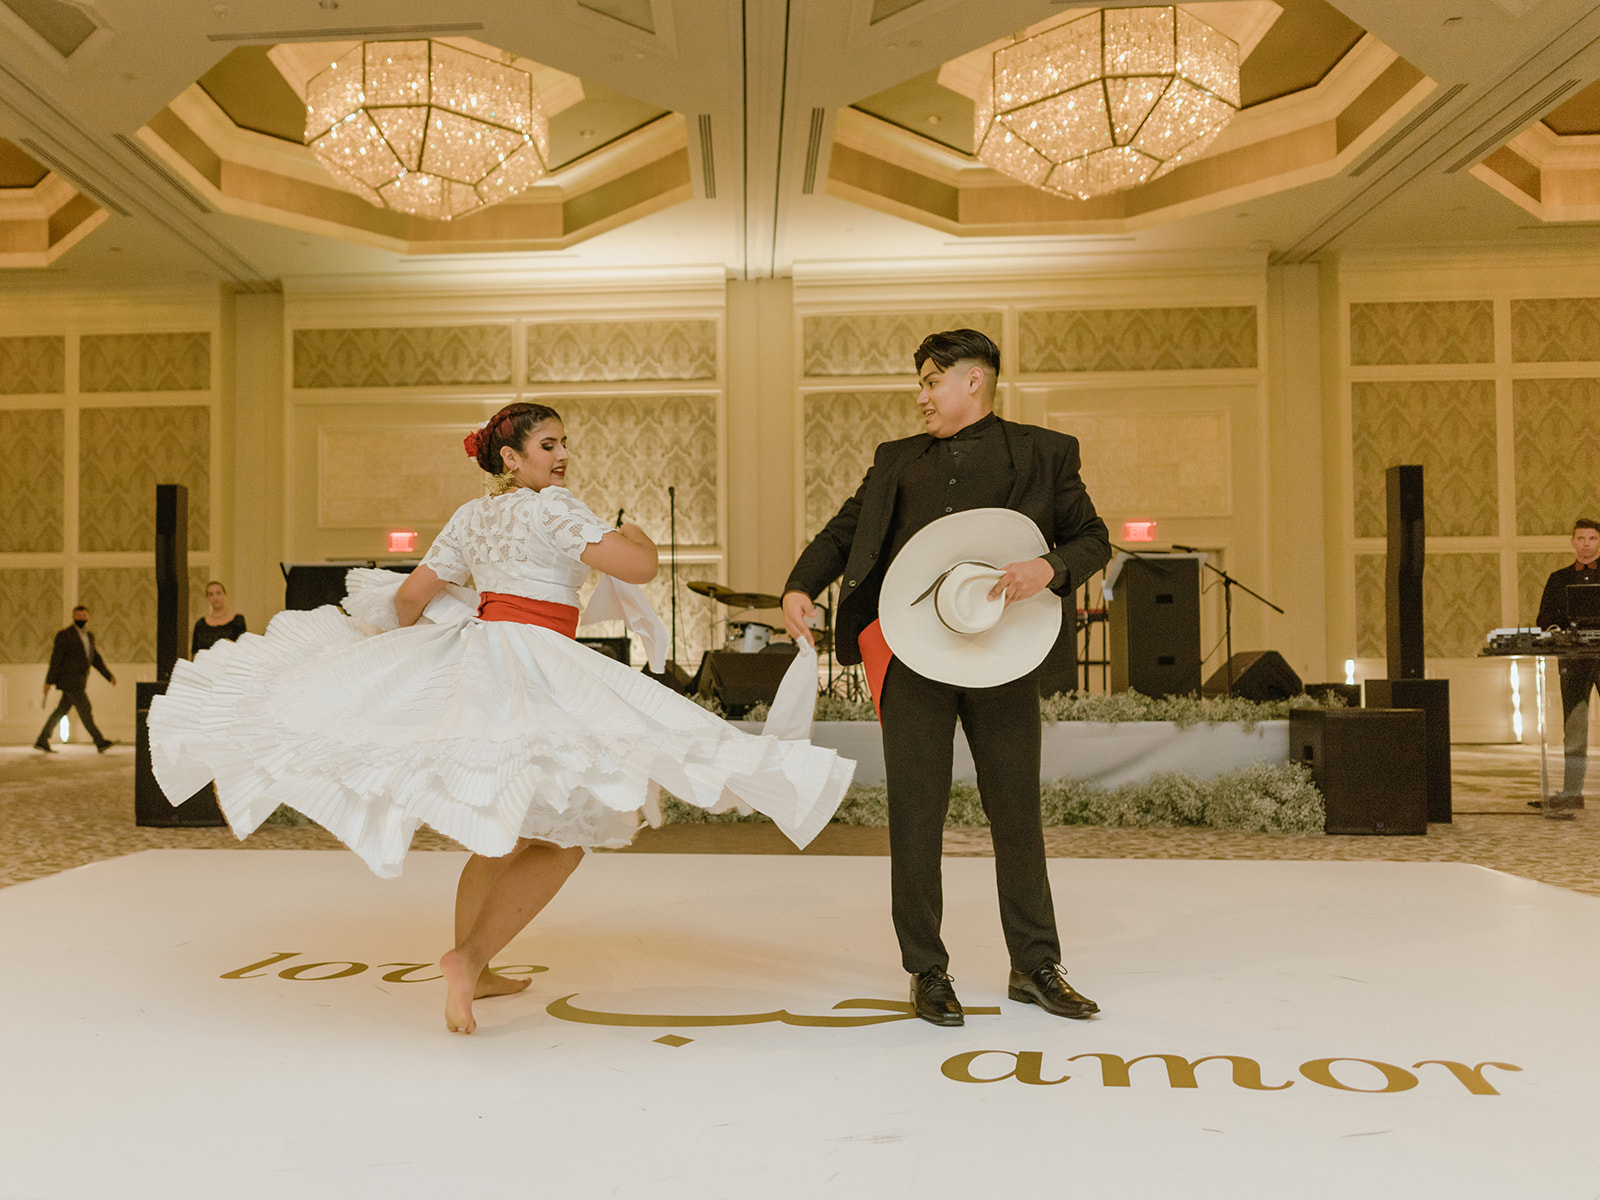 A fusion wedding of Peruvian and Egyptian cultures and an opulent and luxurious reception at the Four Seasons Orlando